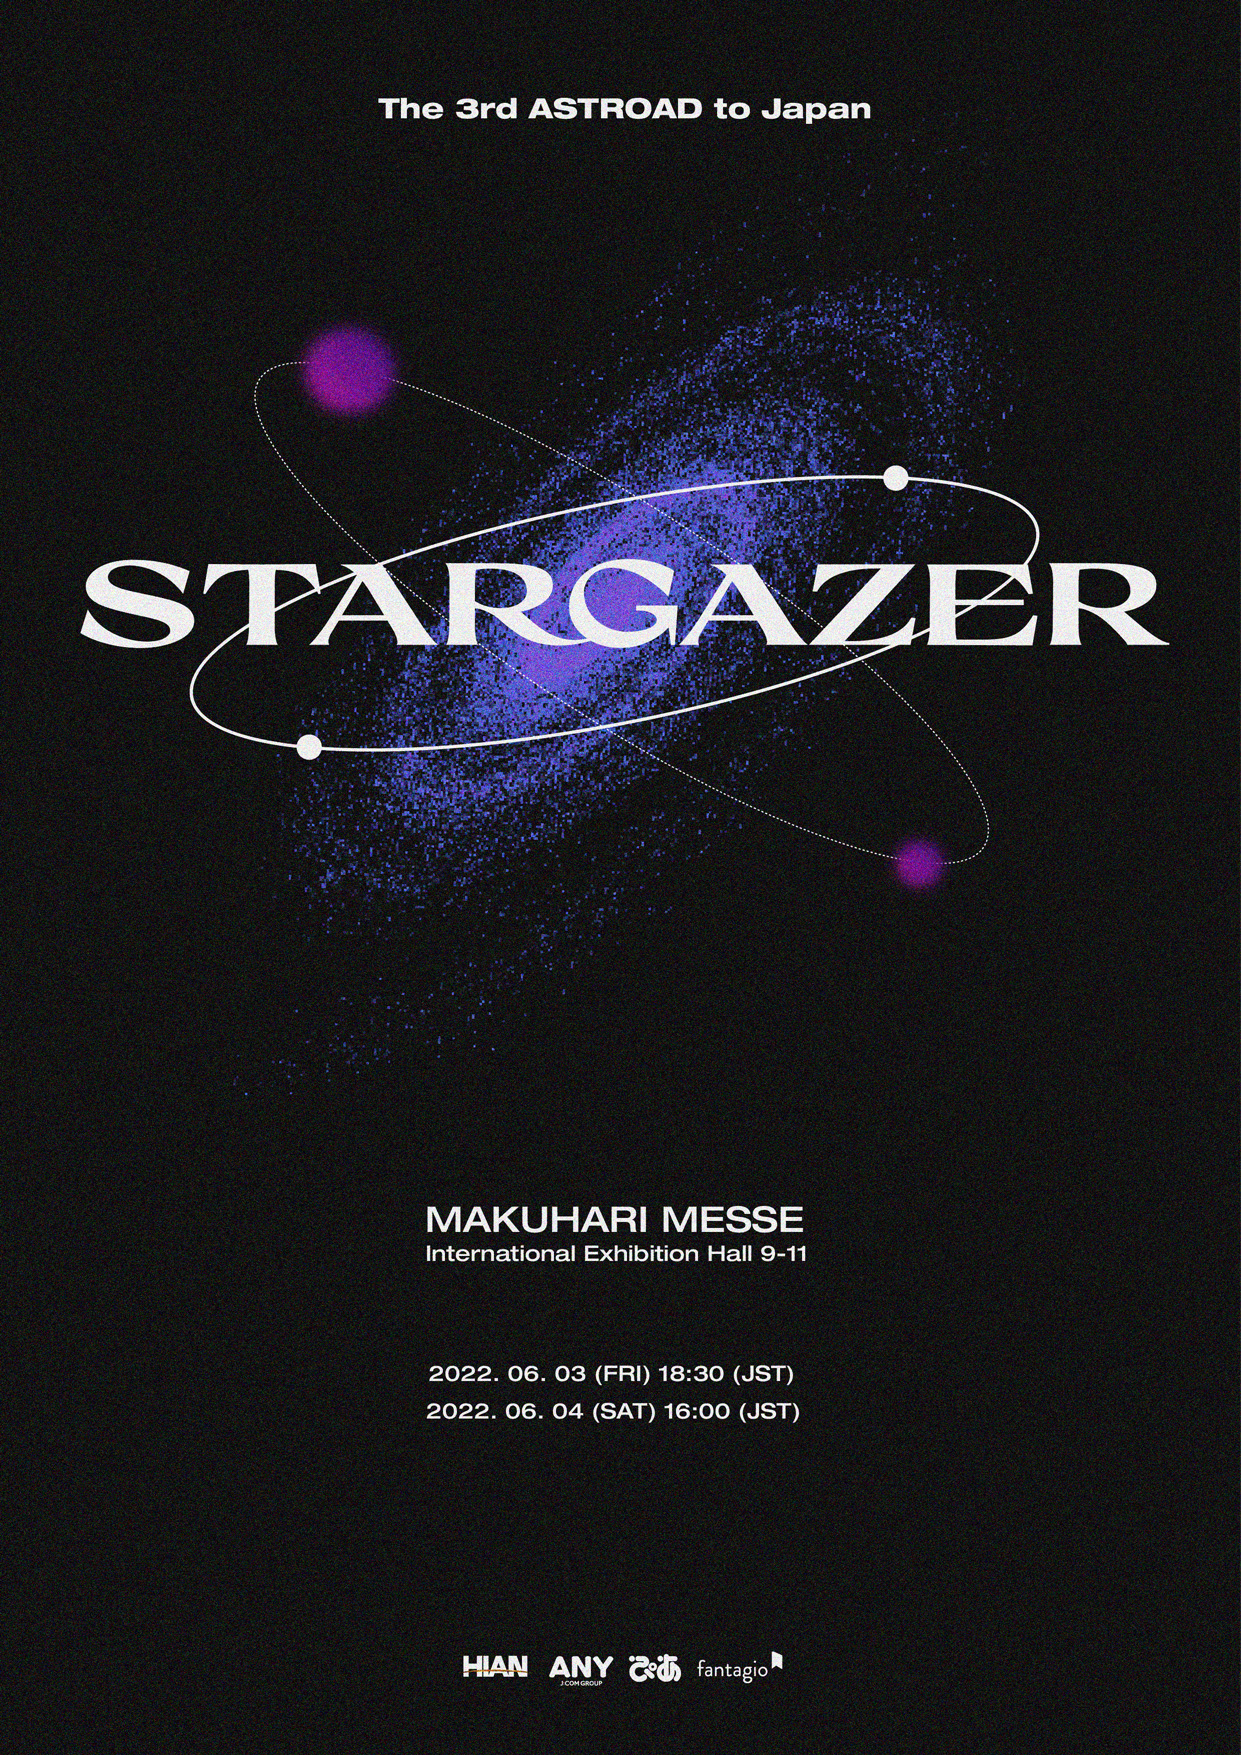 ASTRO 2022 JAPAN CONCERT ＜The 3rd ASTROAD to JAPAN [STARGAZER]＞